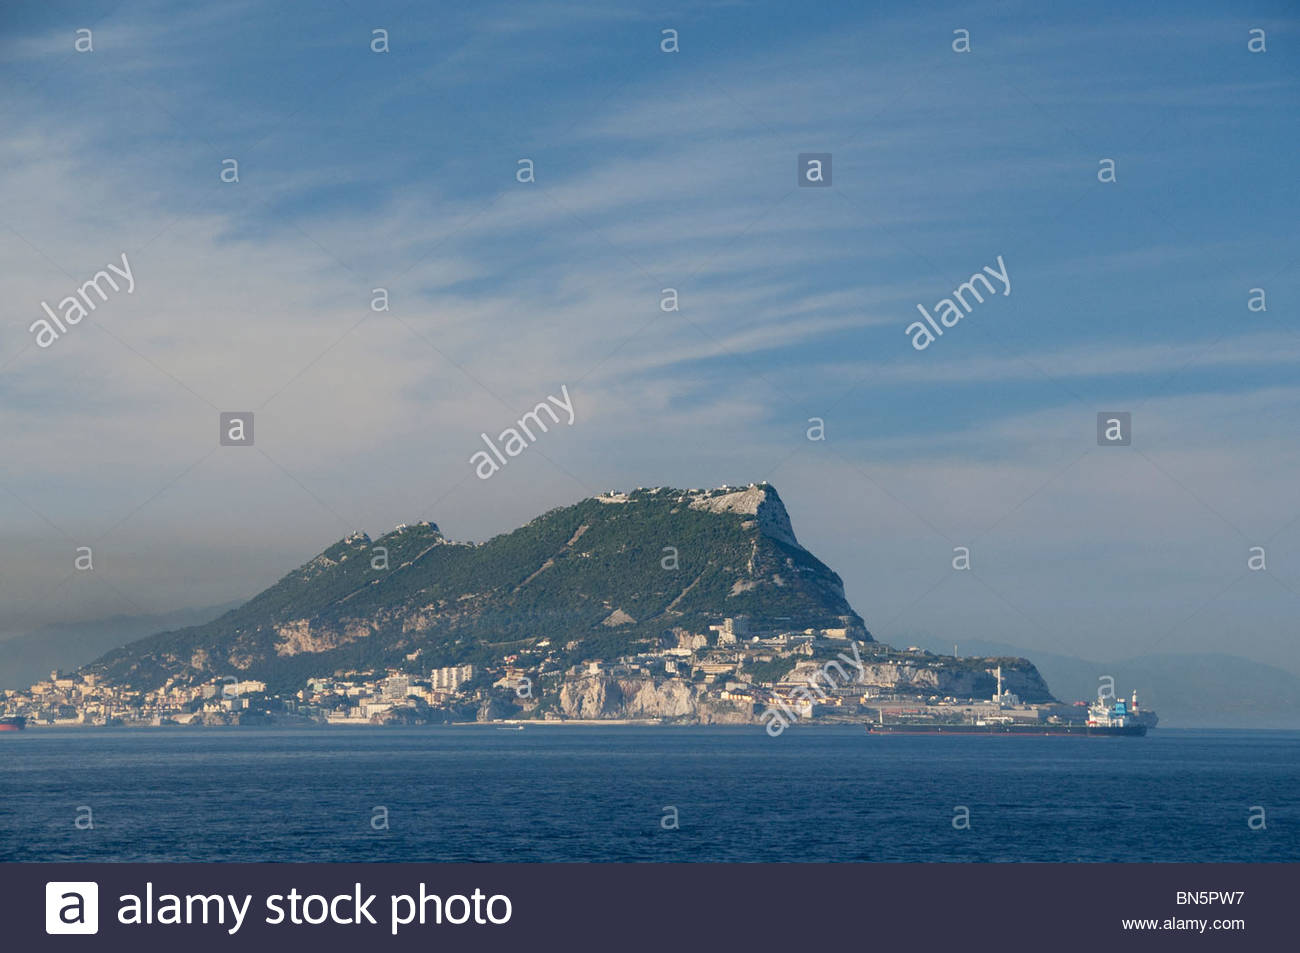 Strait Of Gibraltar clipart #1, Download drawings